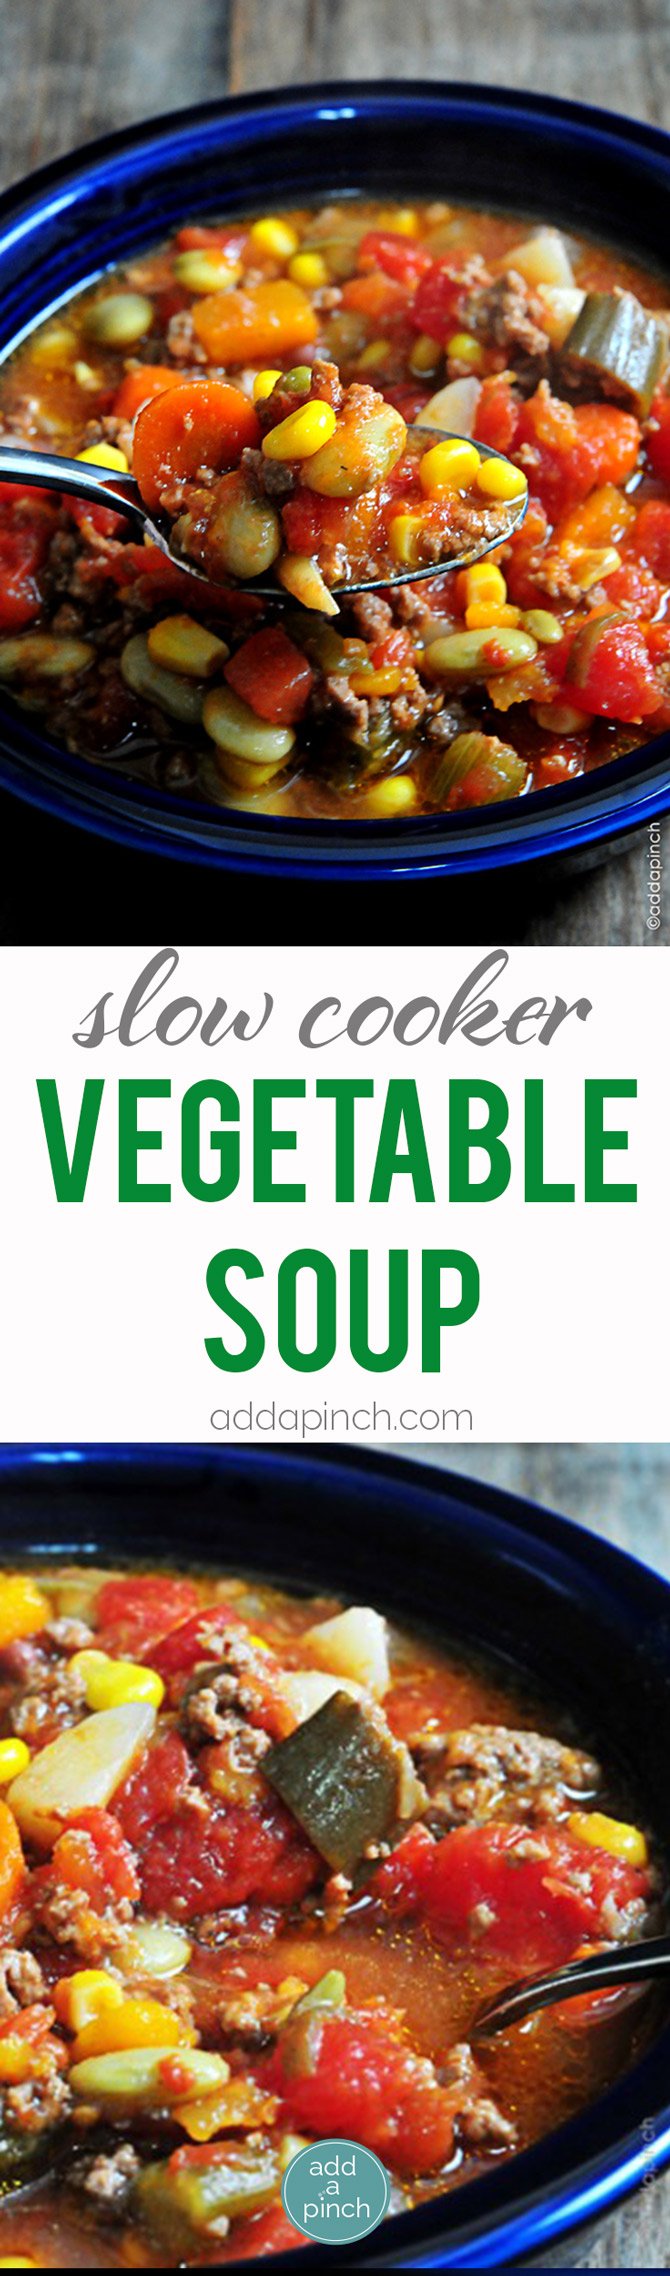 Slow Cooker Vegetable Soup - This Slow Cooker Vegetable Soup recipe is so simple to make and absolutely scrumptious. A definite family favorite! // addapinch.com